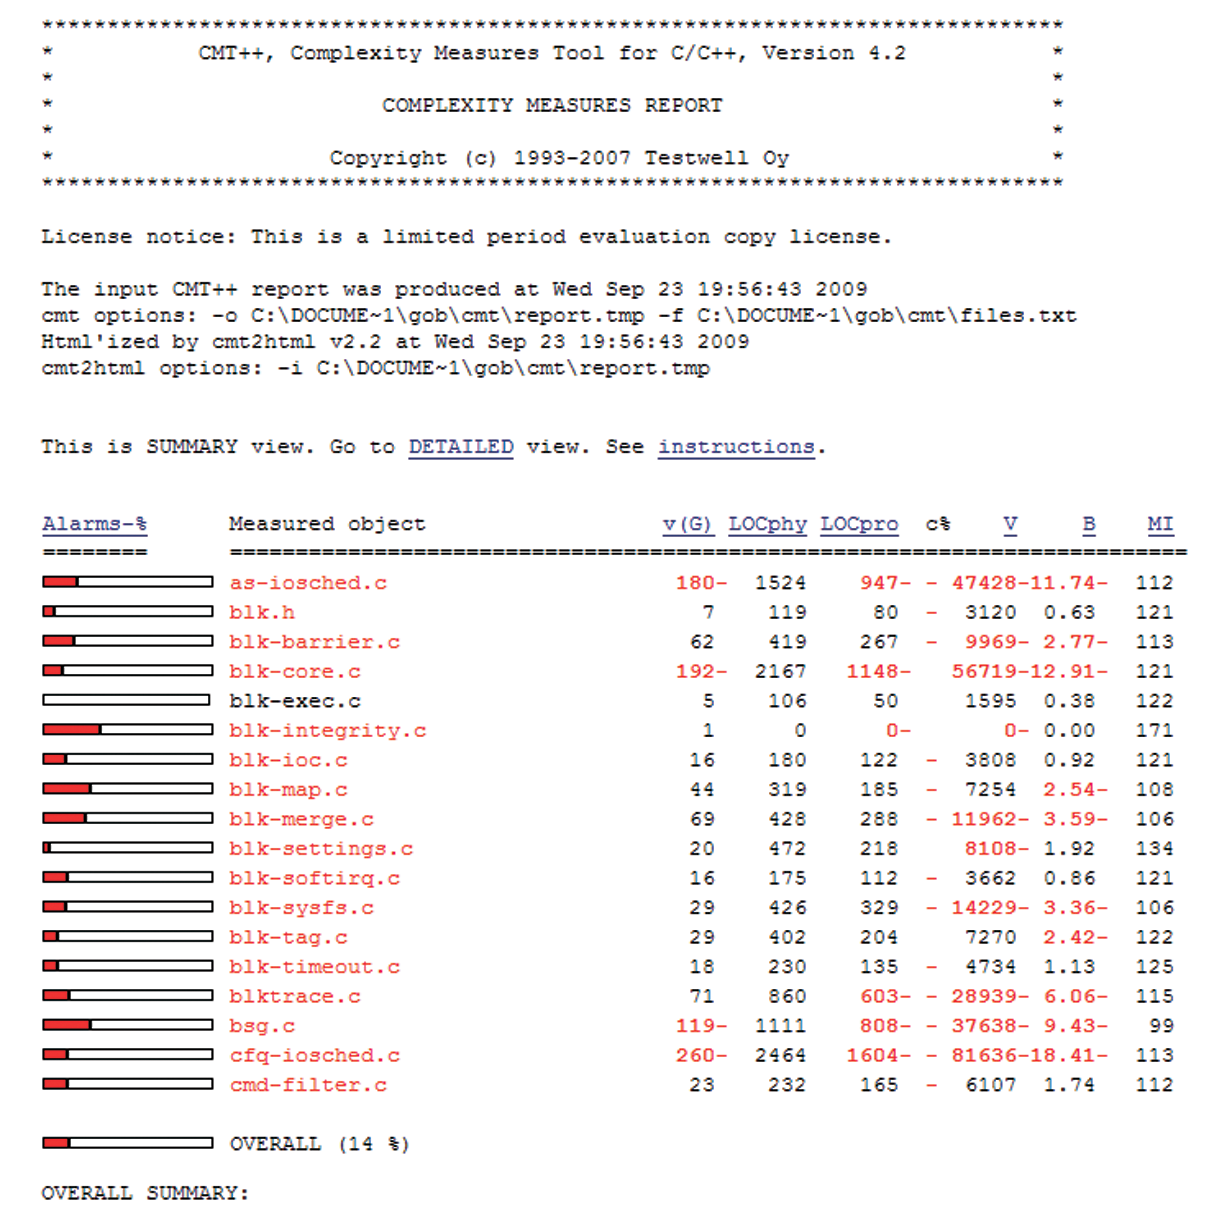 Original loosely linked HTML report by Testwell.